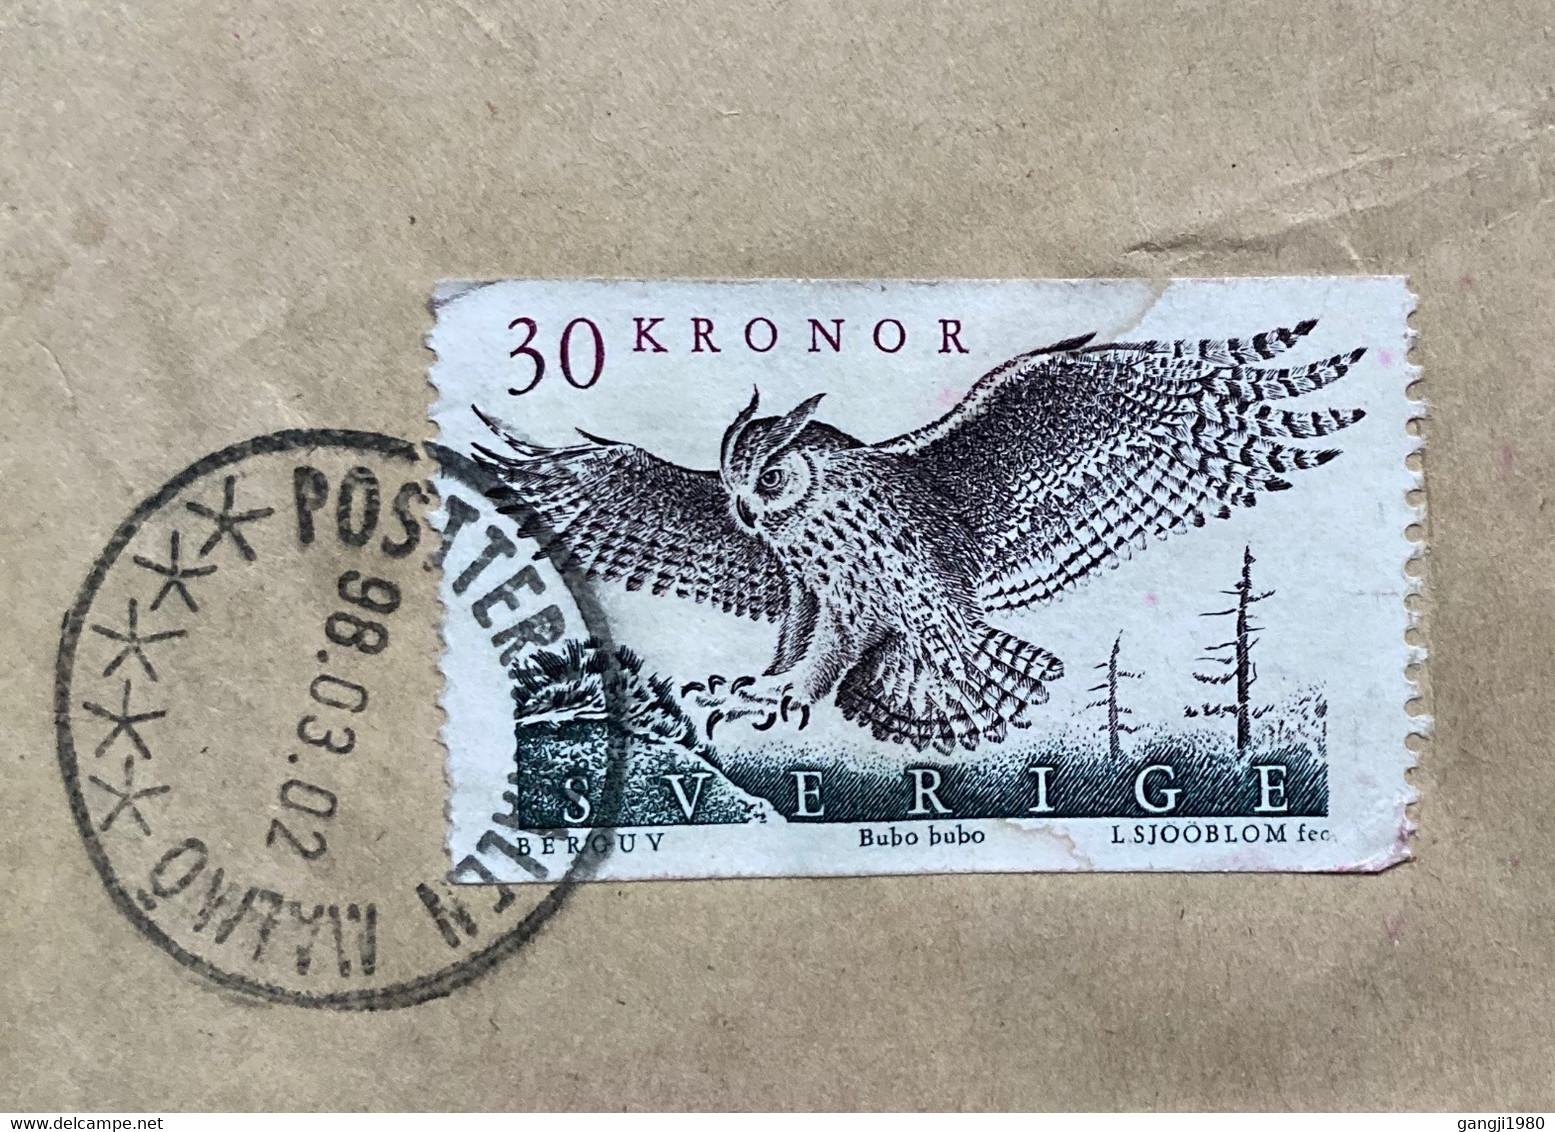 SWEDEN 1998, EAGLE BIRD 30kr RATE!! ECONOMIC VIGNETTE LABEL USED COVER TO INDIA,MALMO CITY - Covers & Documents